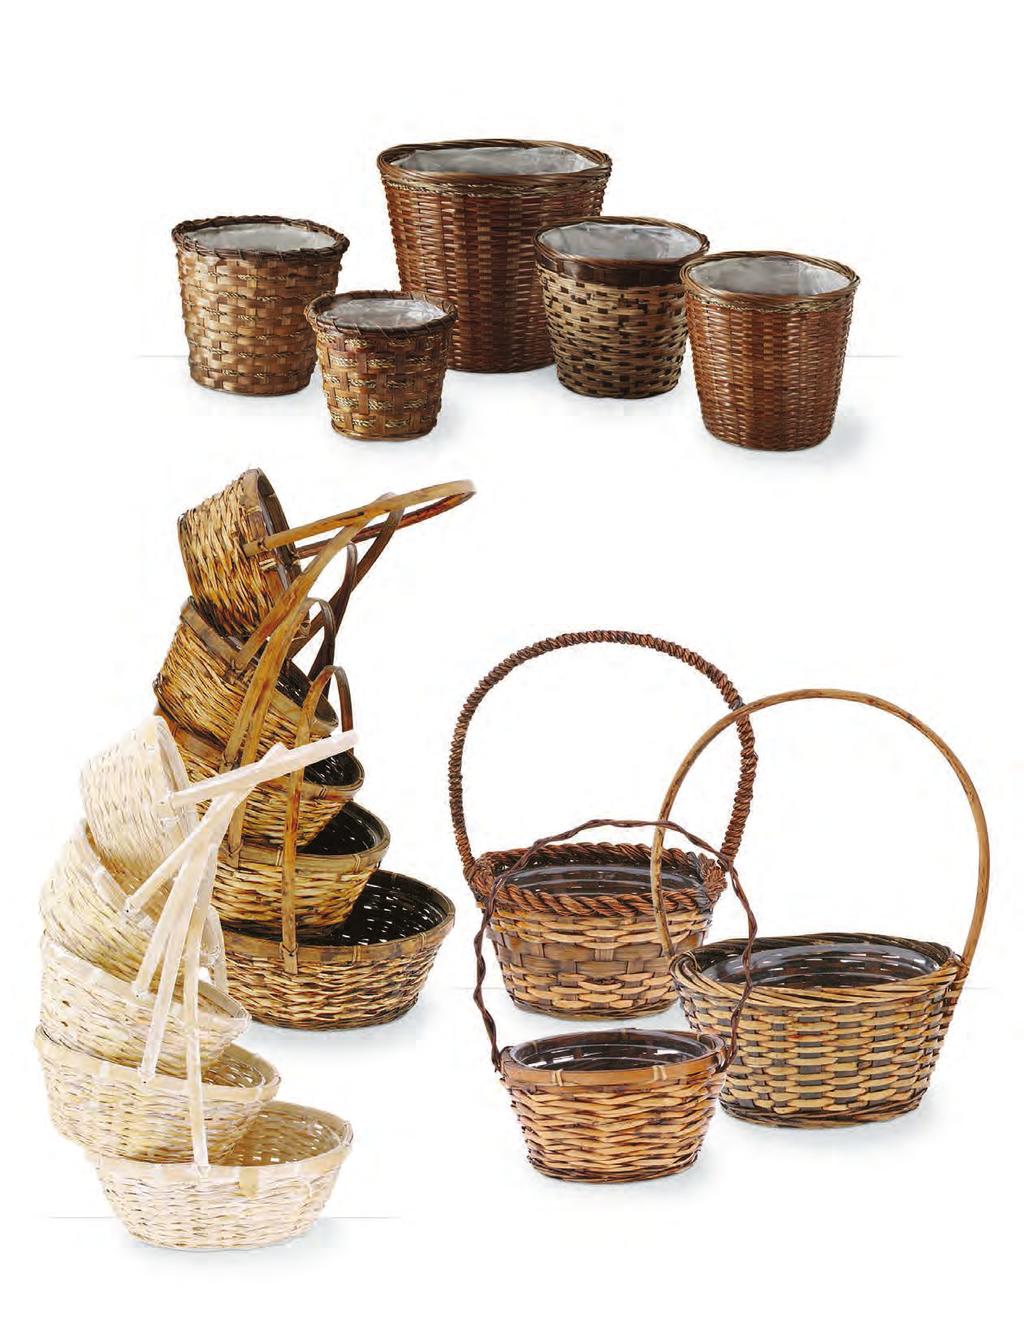 Assorted Design Bamboo Baskets in Brown Stain Includes Sewn-In Liners 0287/6 Fits 6 pot 24/$2.29 ea. 0288/8 Fits 8 pot 12/$2.99 ea.